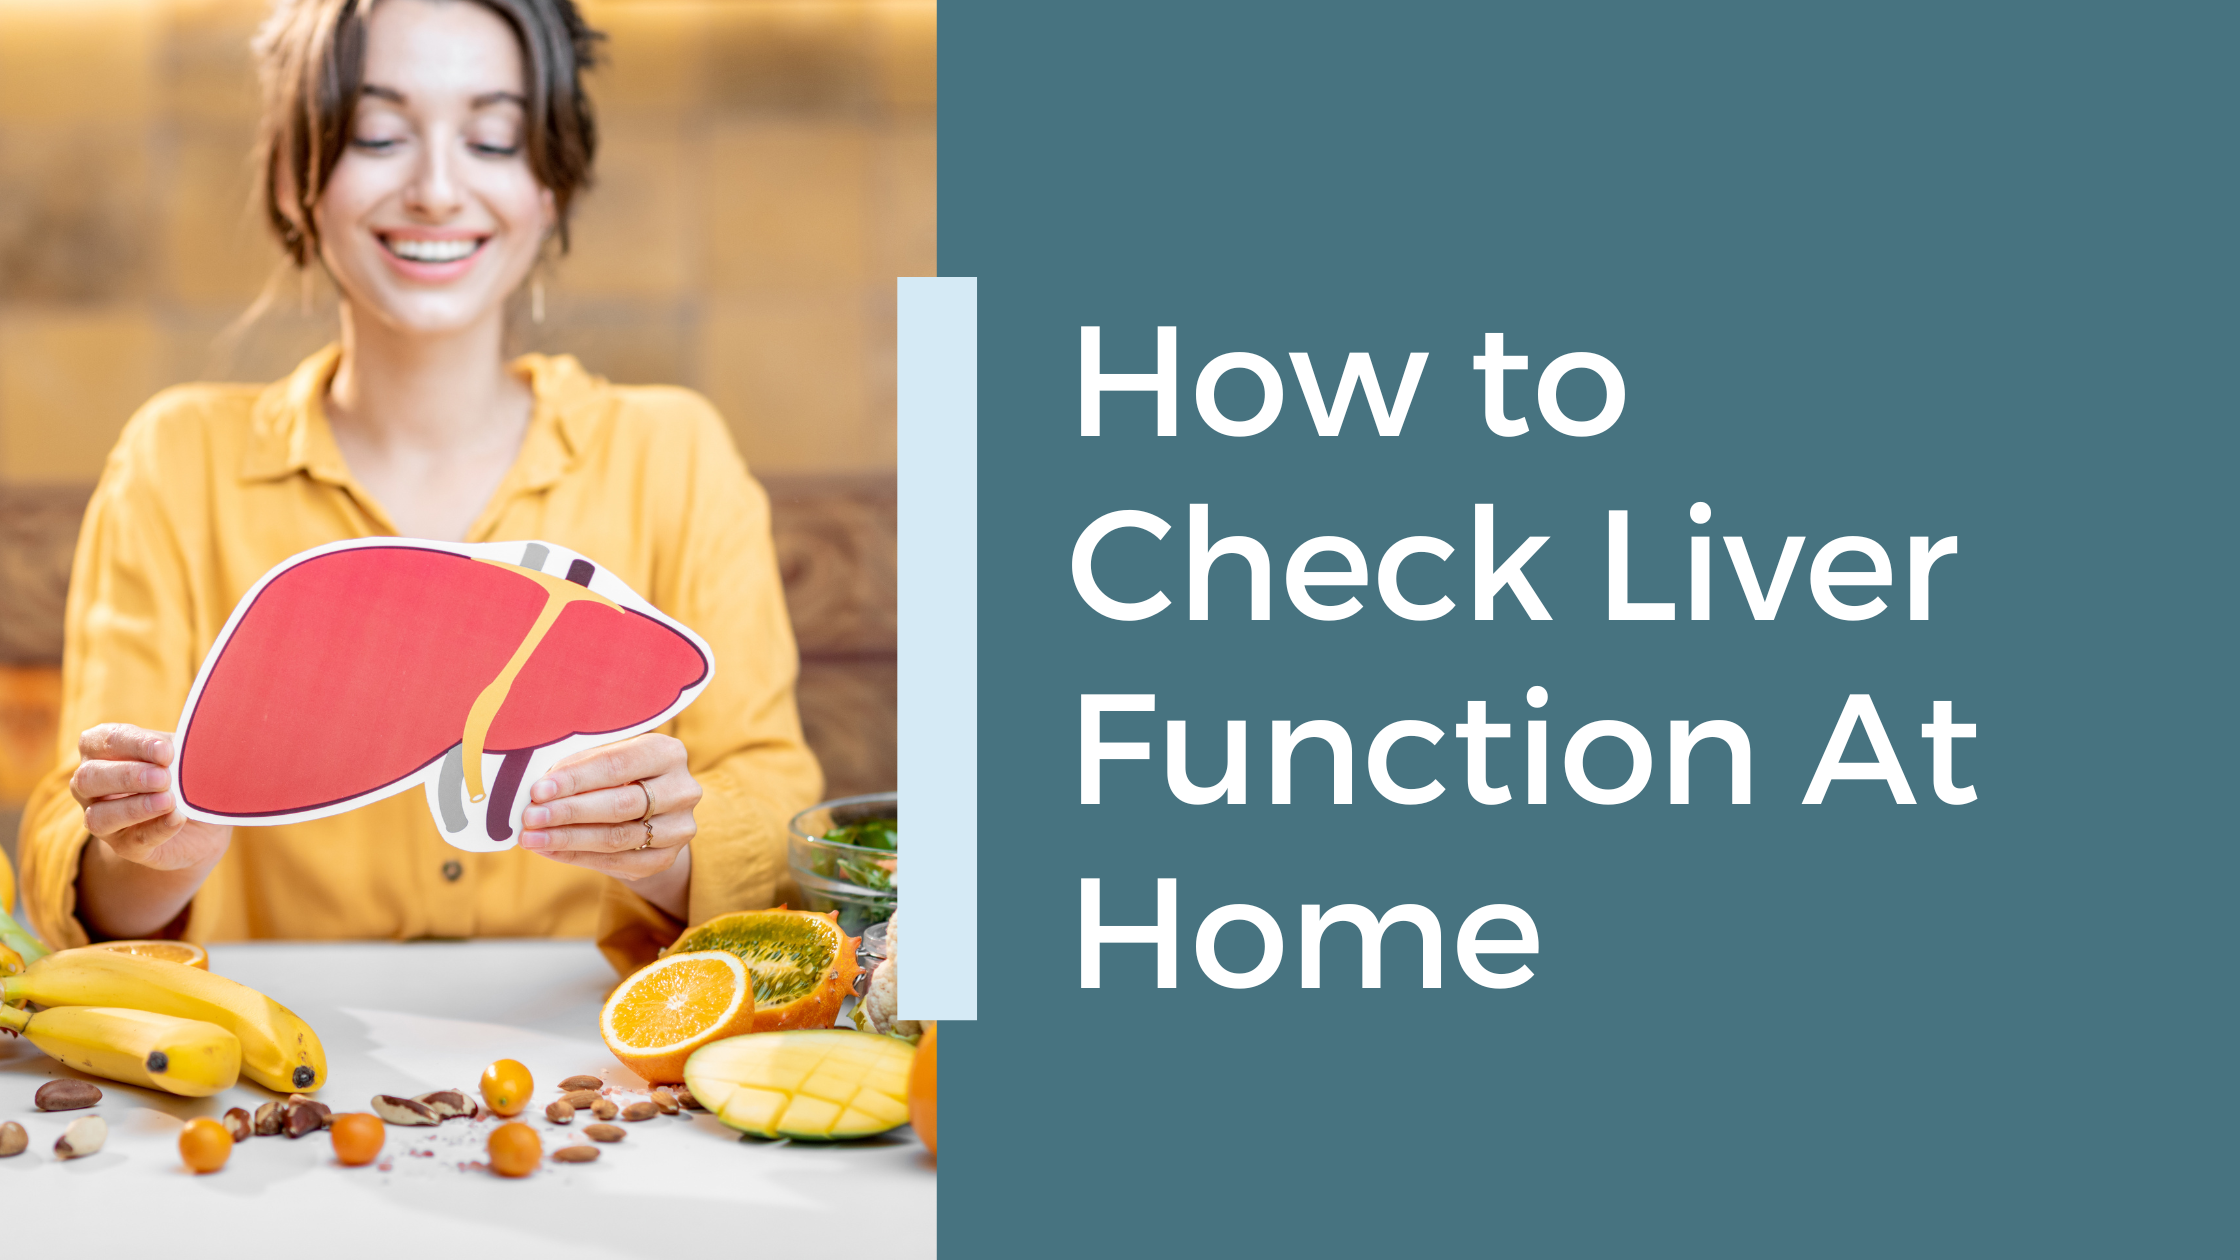 How to Check Liver Function At Home